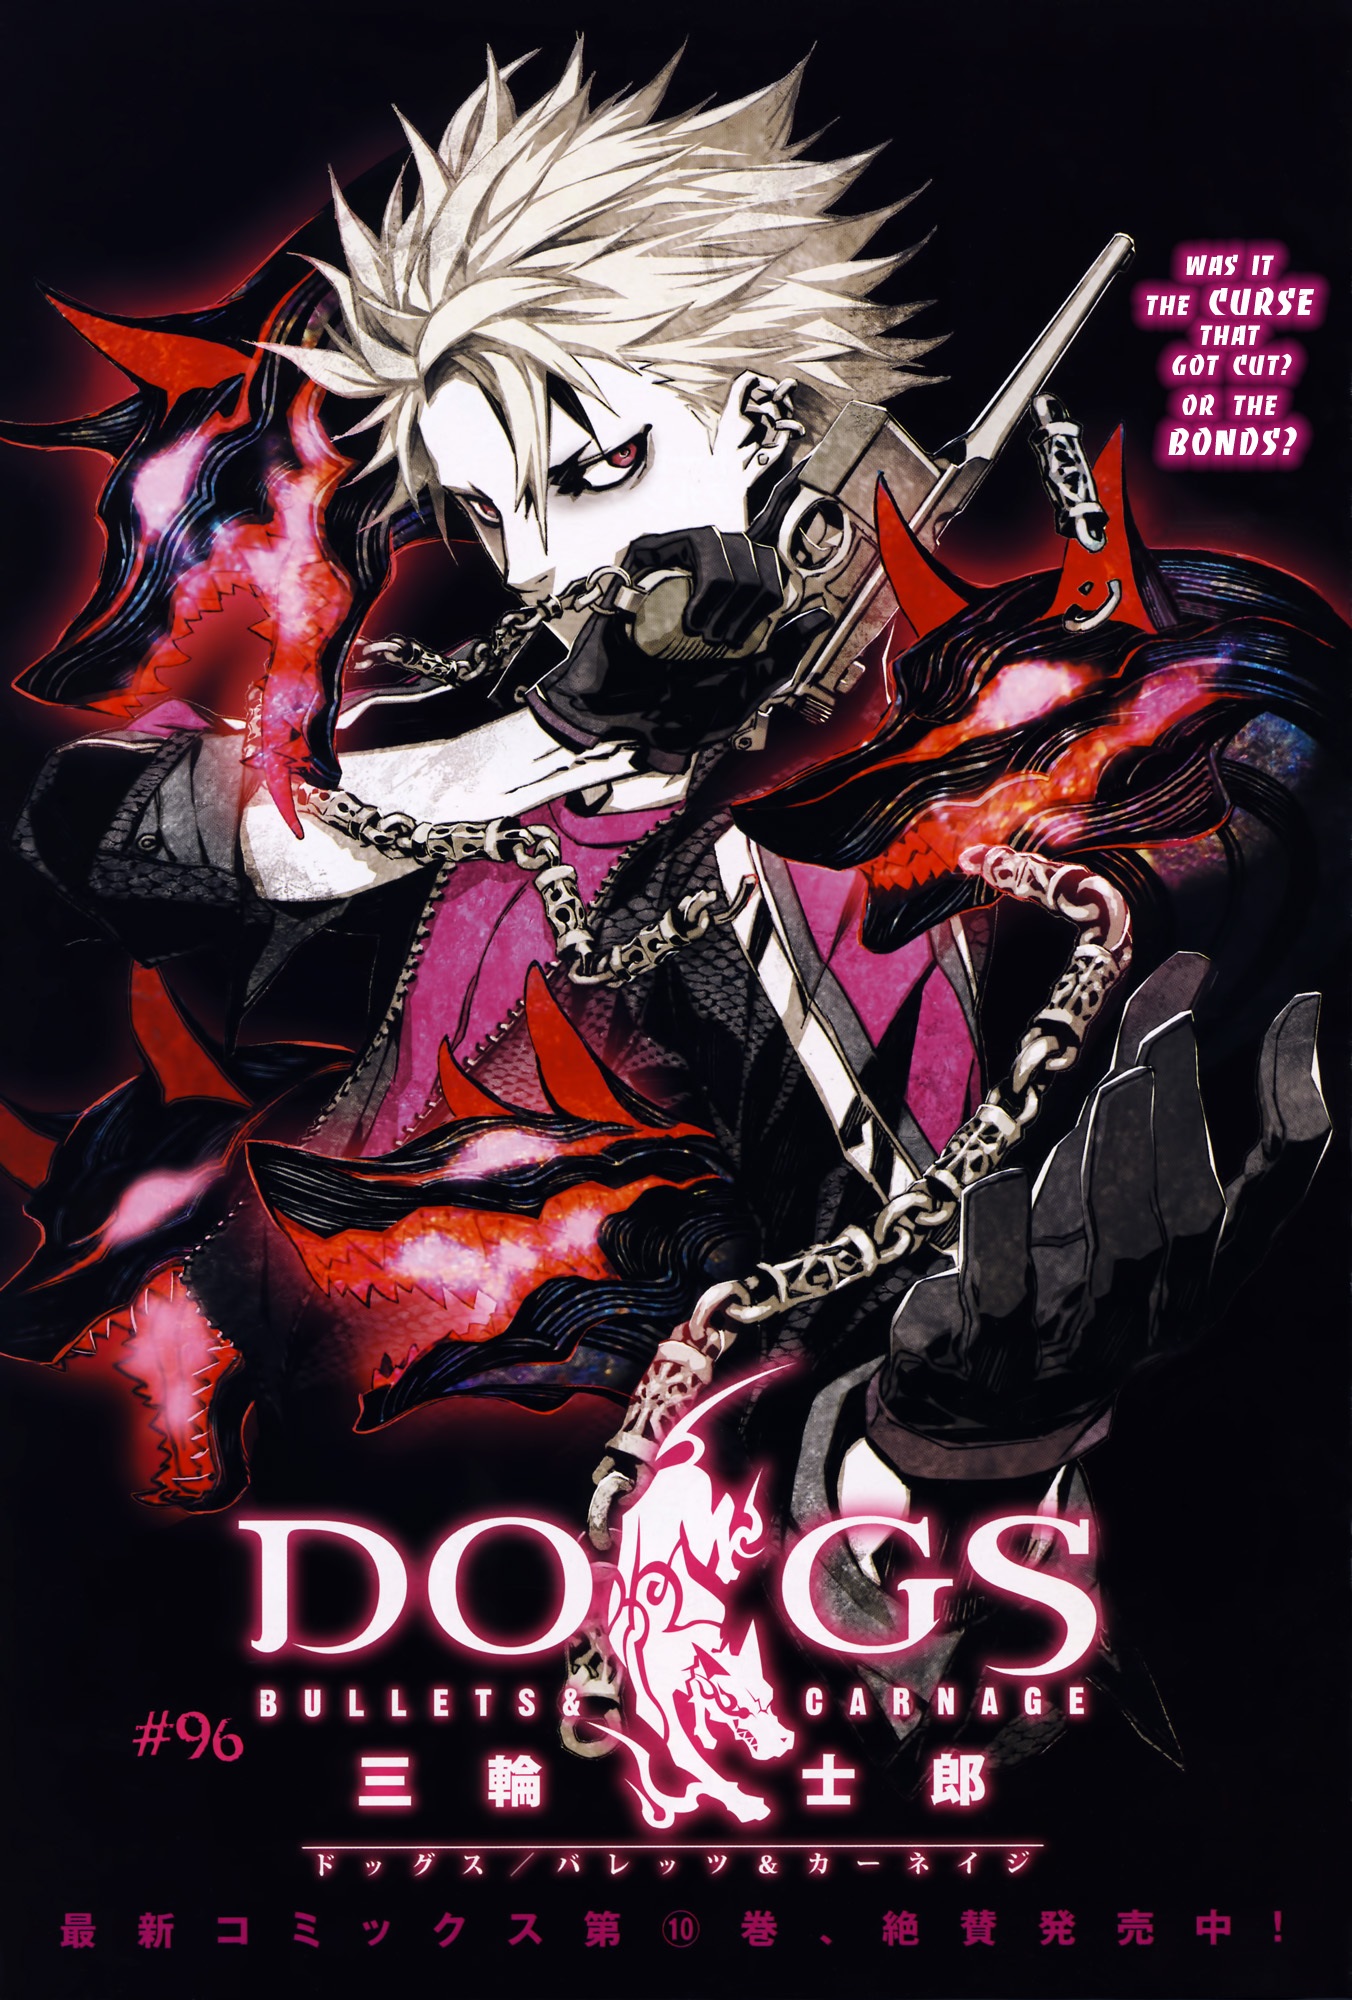 Chapter 96 Bullets Carnage Dogs Bullets And Carnage Wiki Fandom